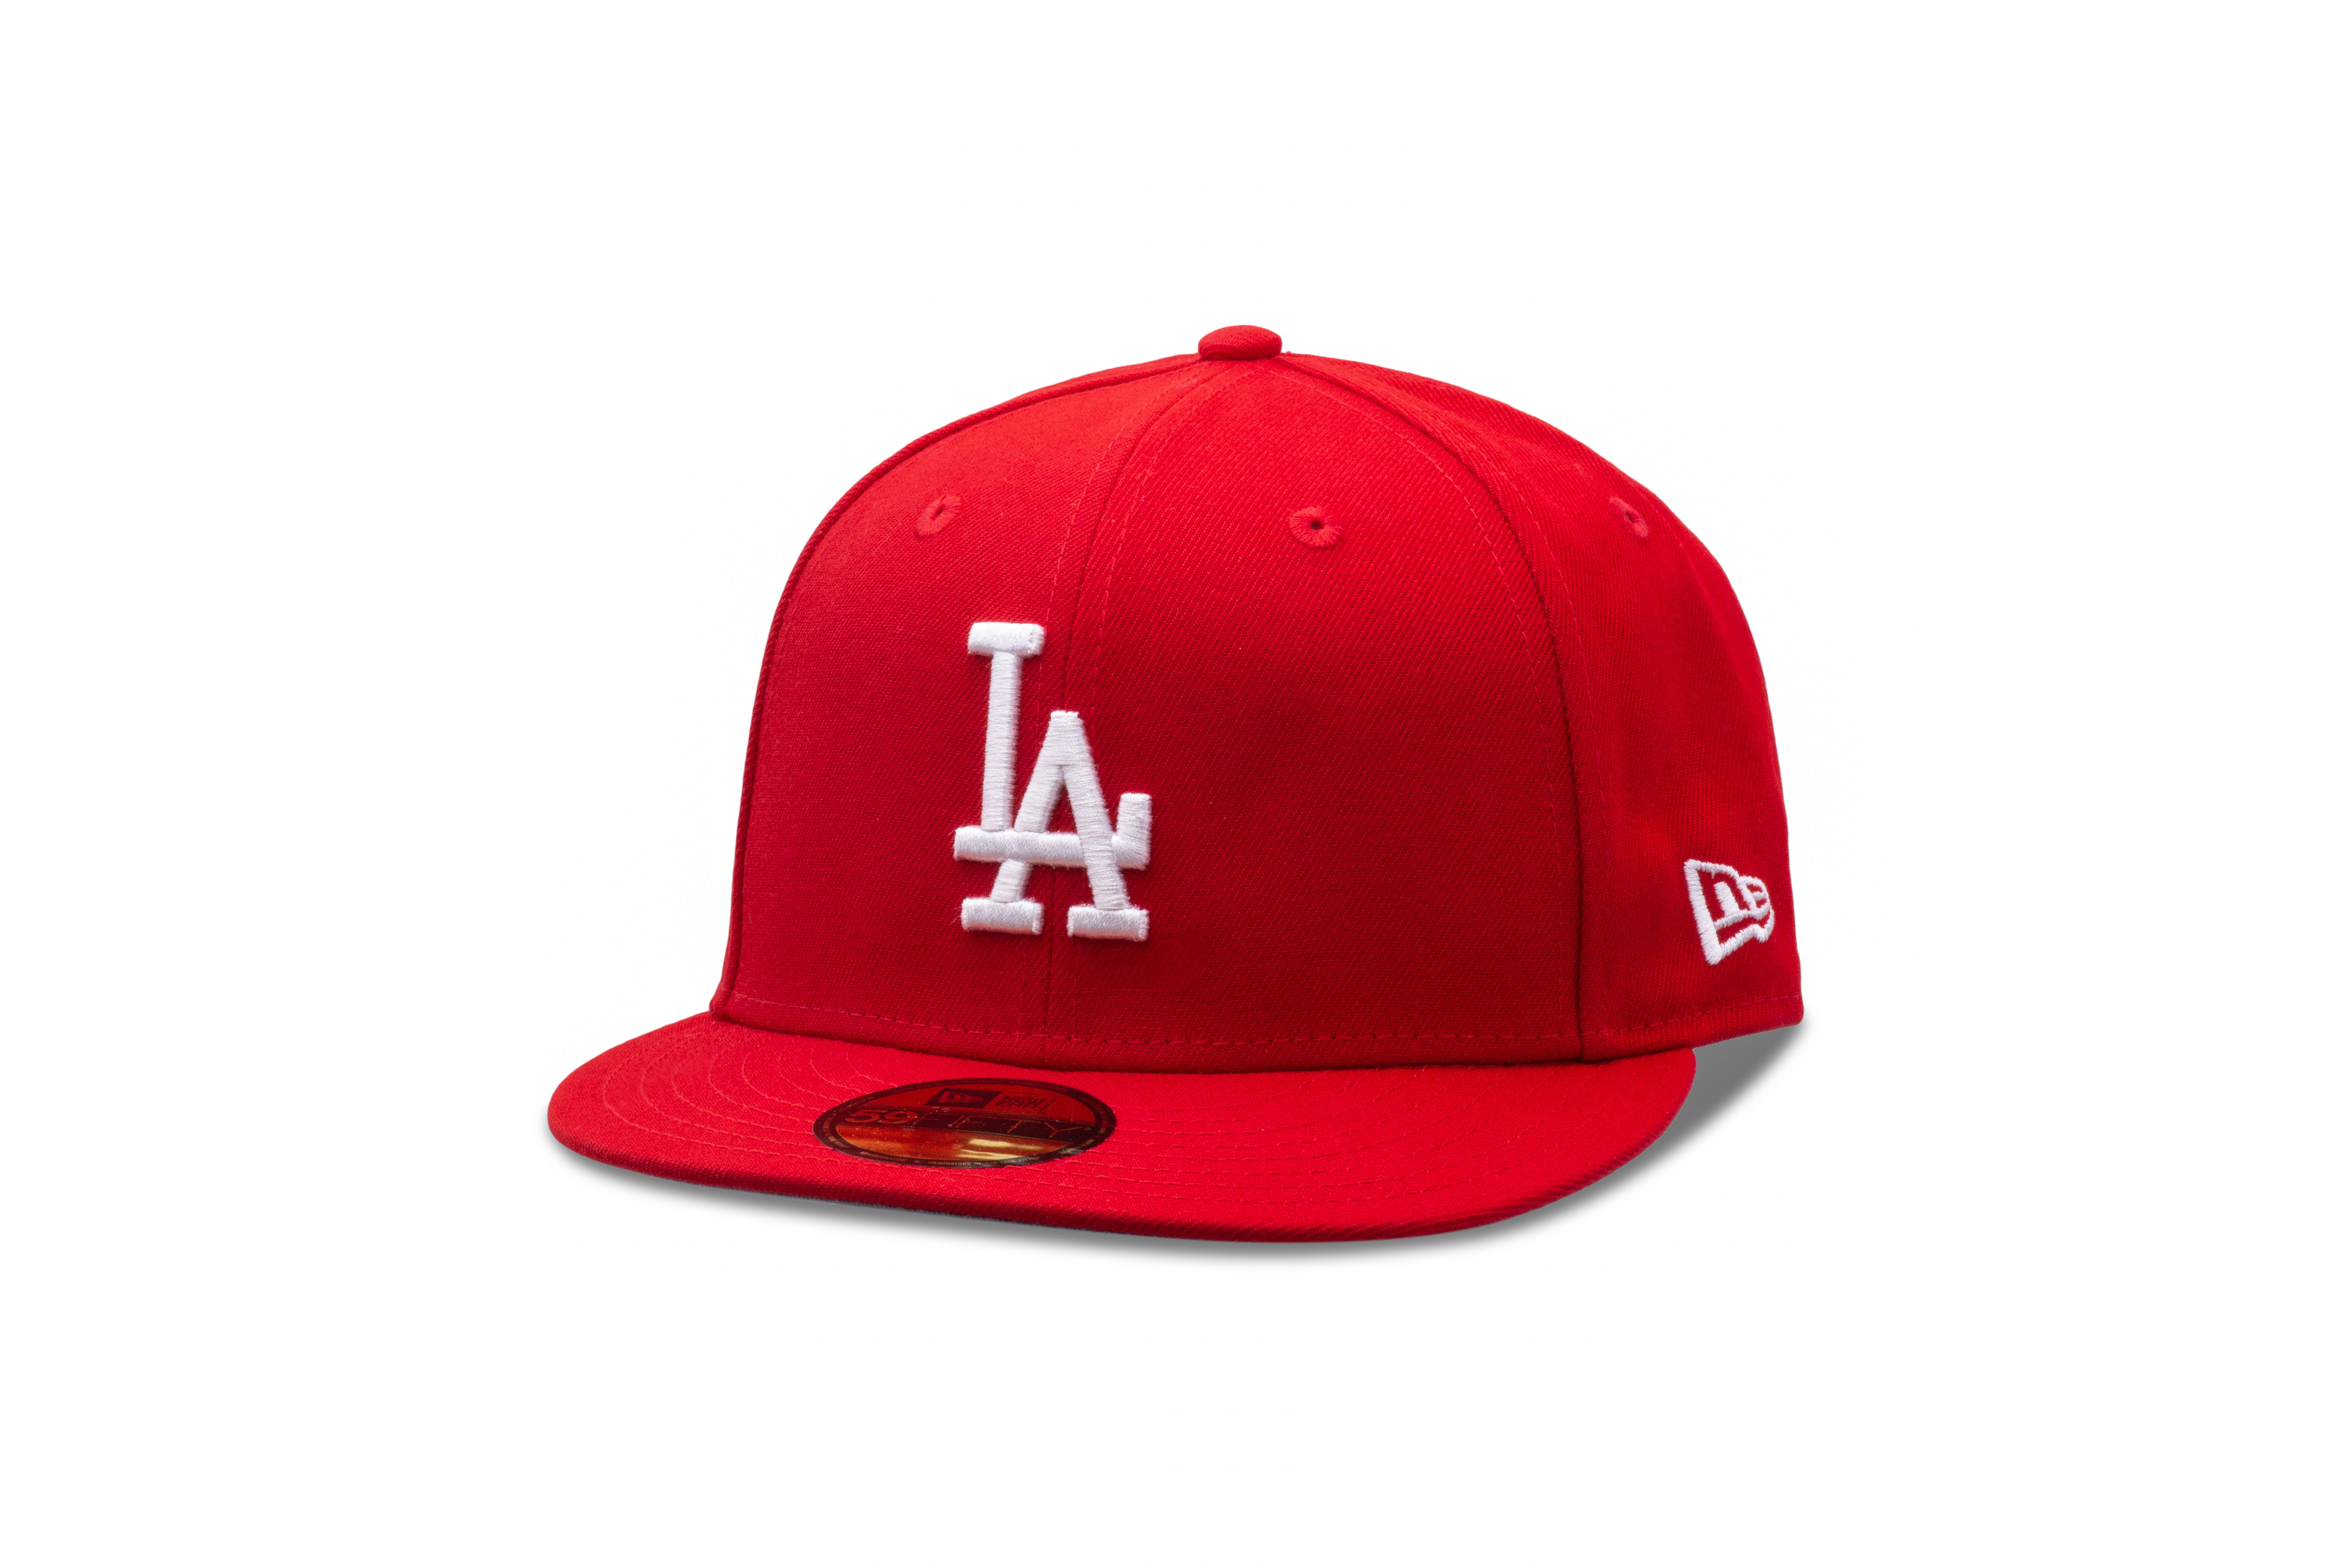 New Era MLB Basic Los Angeles Dodgers 59Fifty Fitted Baseball Cap - Scarlet Red - 7 3/8